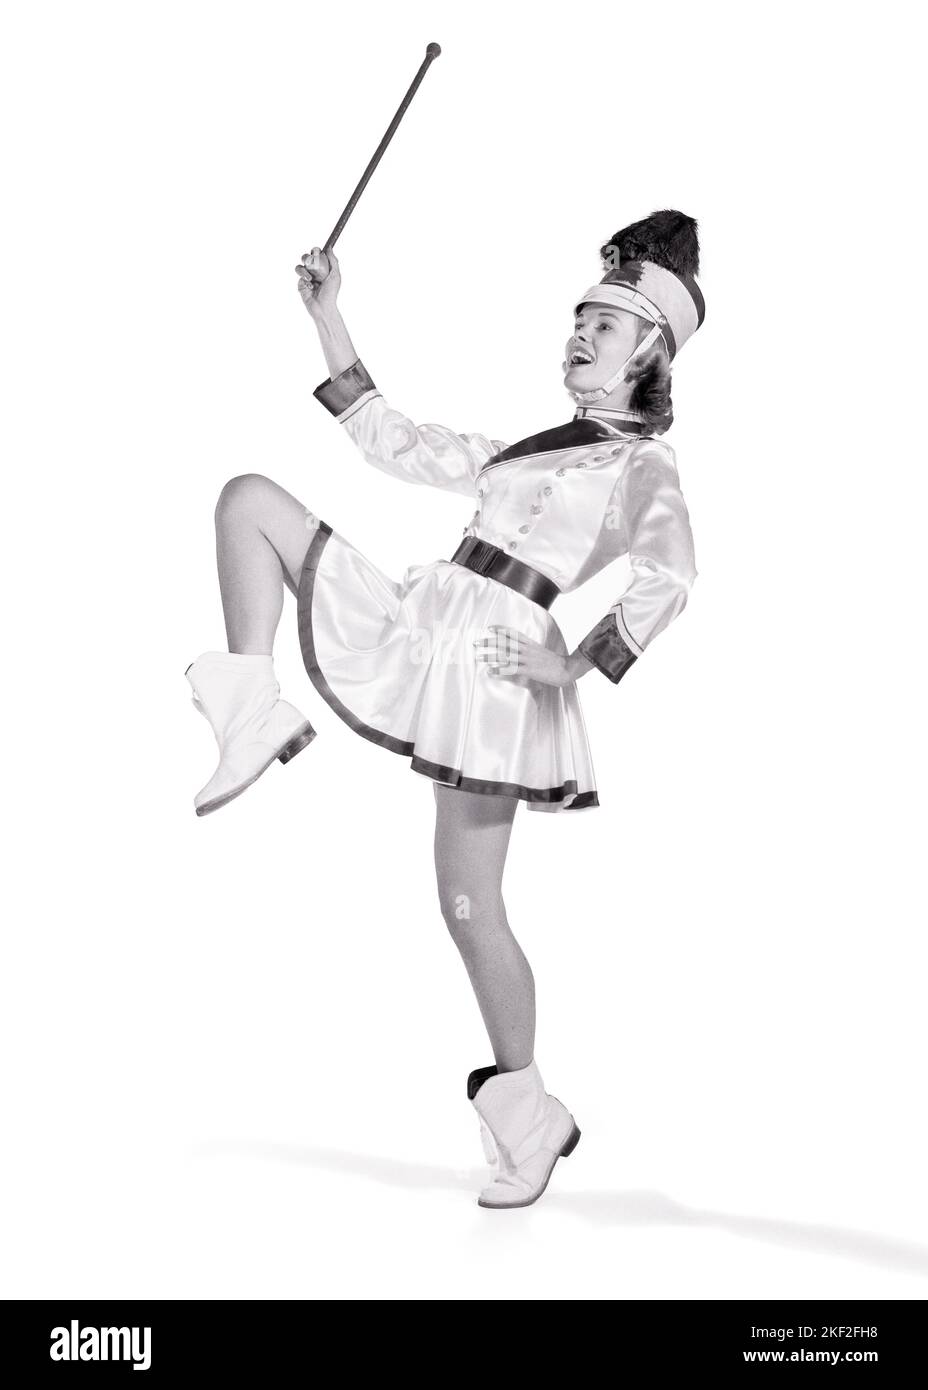 1960s SMILING GIRL MAJORETTE WITH BATON WEARING BAND UNIFORM WITH PLUMED HAT BOOTS SHORT SKIRT POSING WITH ONE LEG RAISED - p2279 DEB001 HARS MARCHING CELEBRATION FEMALES STUDIO SHOT COPY SPACE FULL-LENGTH LADIES PERSONS TEENAGE GIRL ENTERTAINMENT CONFIDENCE LEADING B&W SCHOOLS BATON VICTORY UNIVERSITIES RECREATION HIGH SCHOOL MARCH POSING HIGH SCHOOLS HIGHER EDUCATION PLUMED TEENAGED COLLEGES DEB001 MAJORETTE JUVENILES YOUNG ADULT WOMAN BLACK AND WHITE CAUCASIAN ETHNICITY HIGH STEPPING MARCHER OLD FASHIONED PARADES Stock Photo